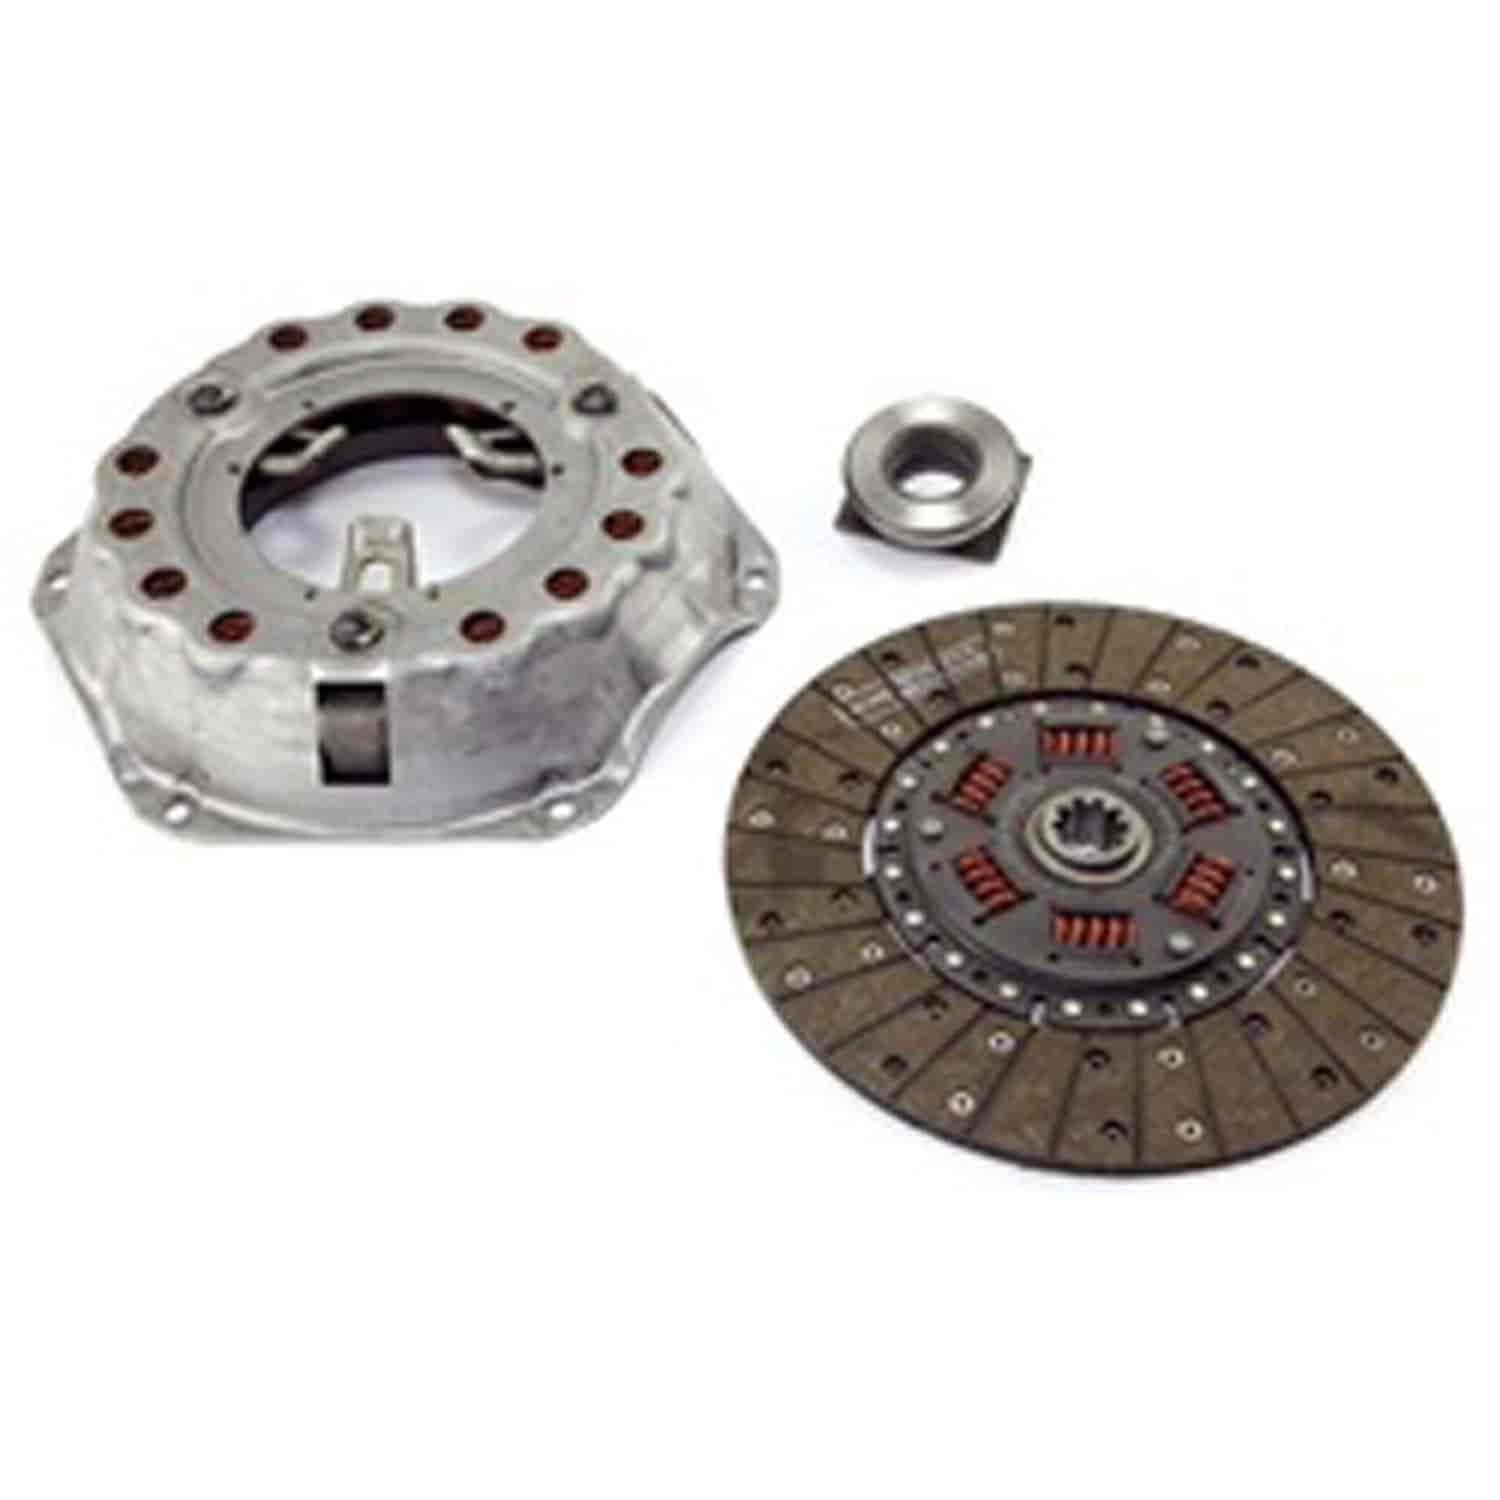 10.5 inch replacement clutch kit for 76-79 Jeep